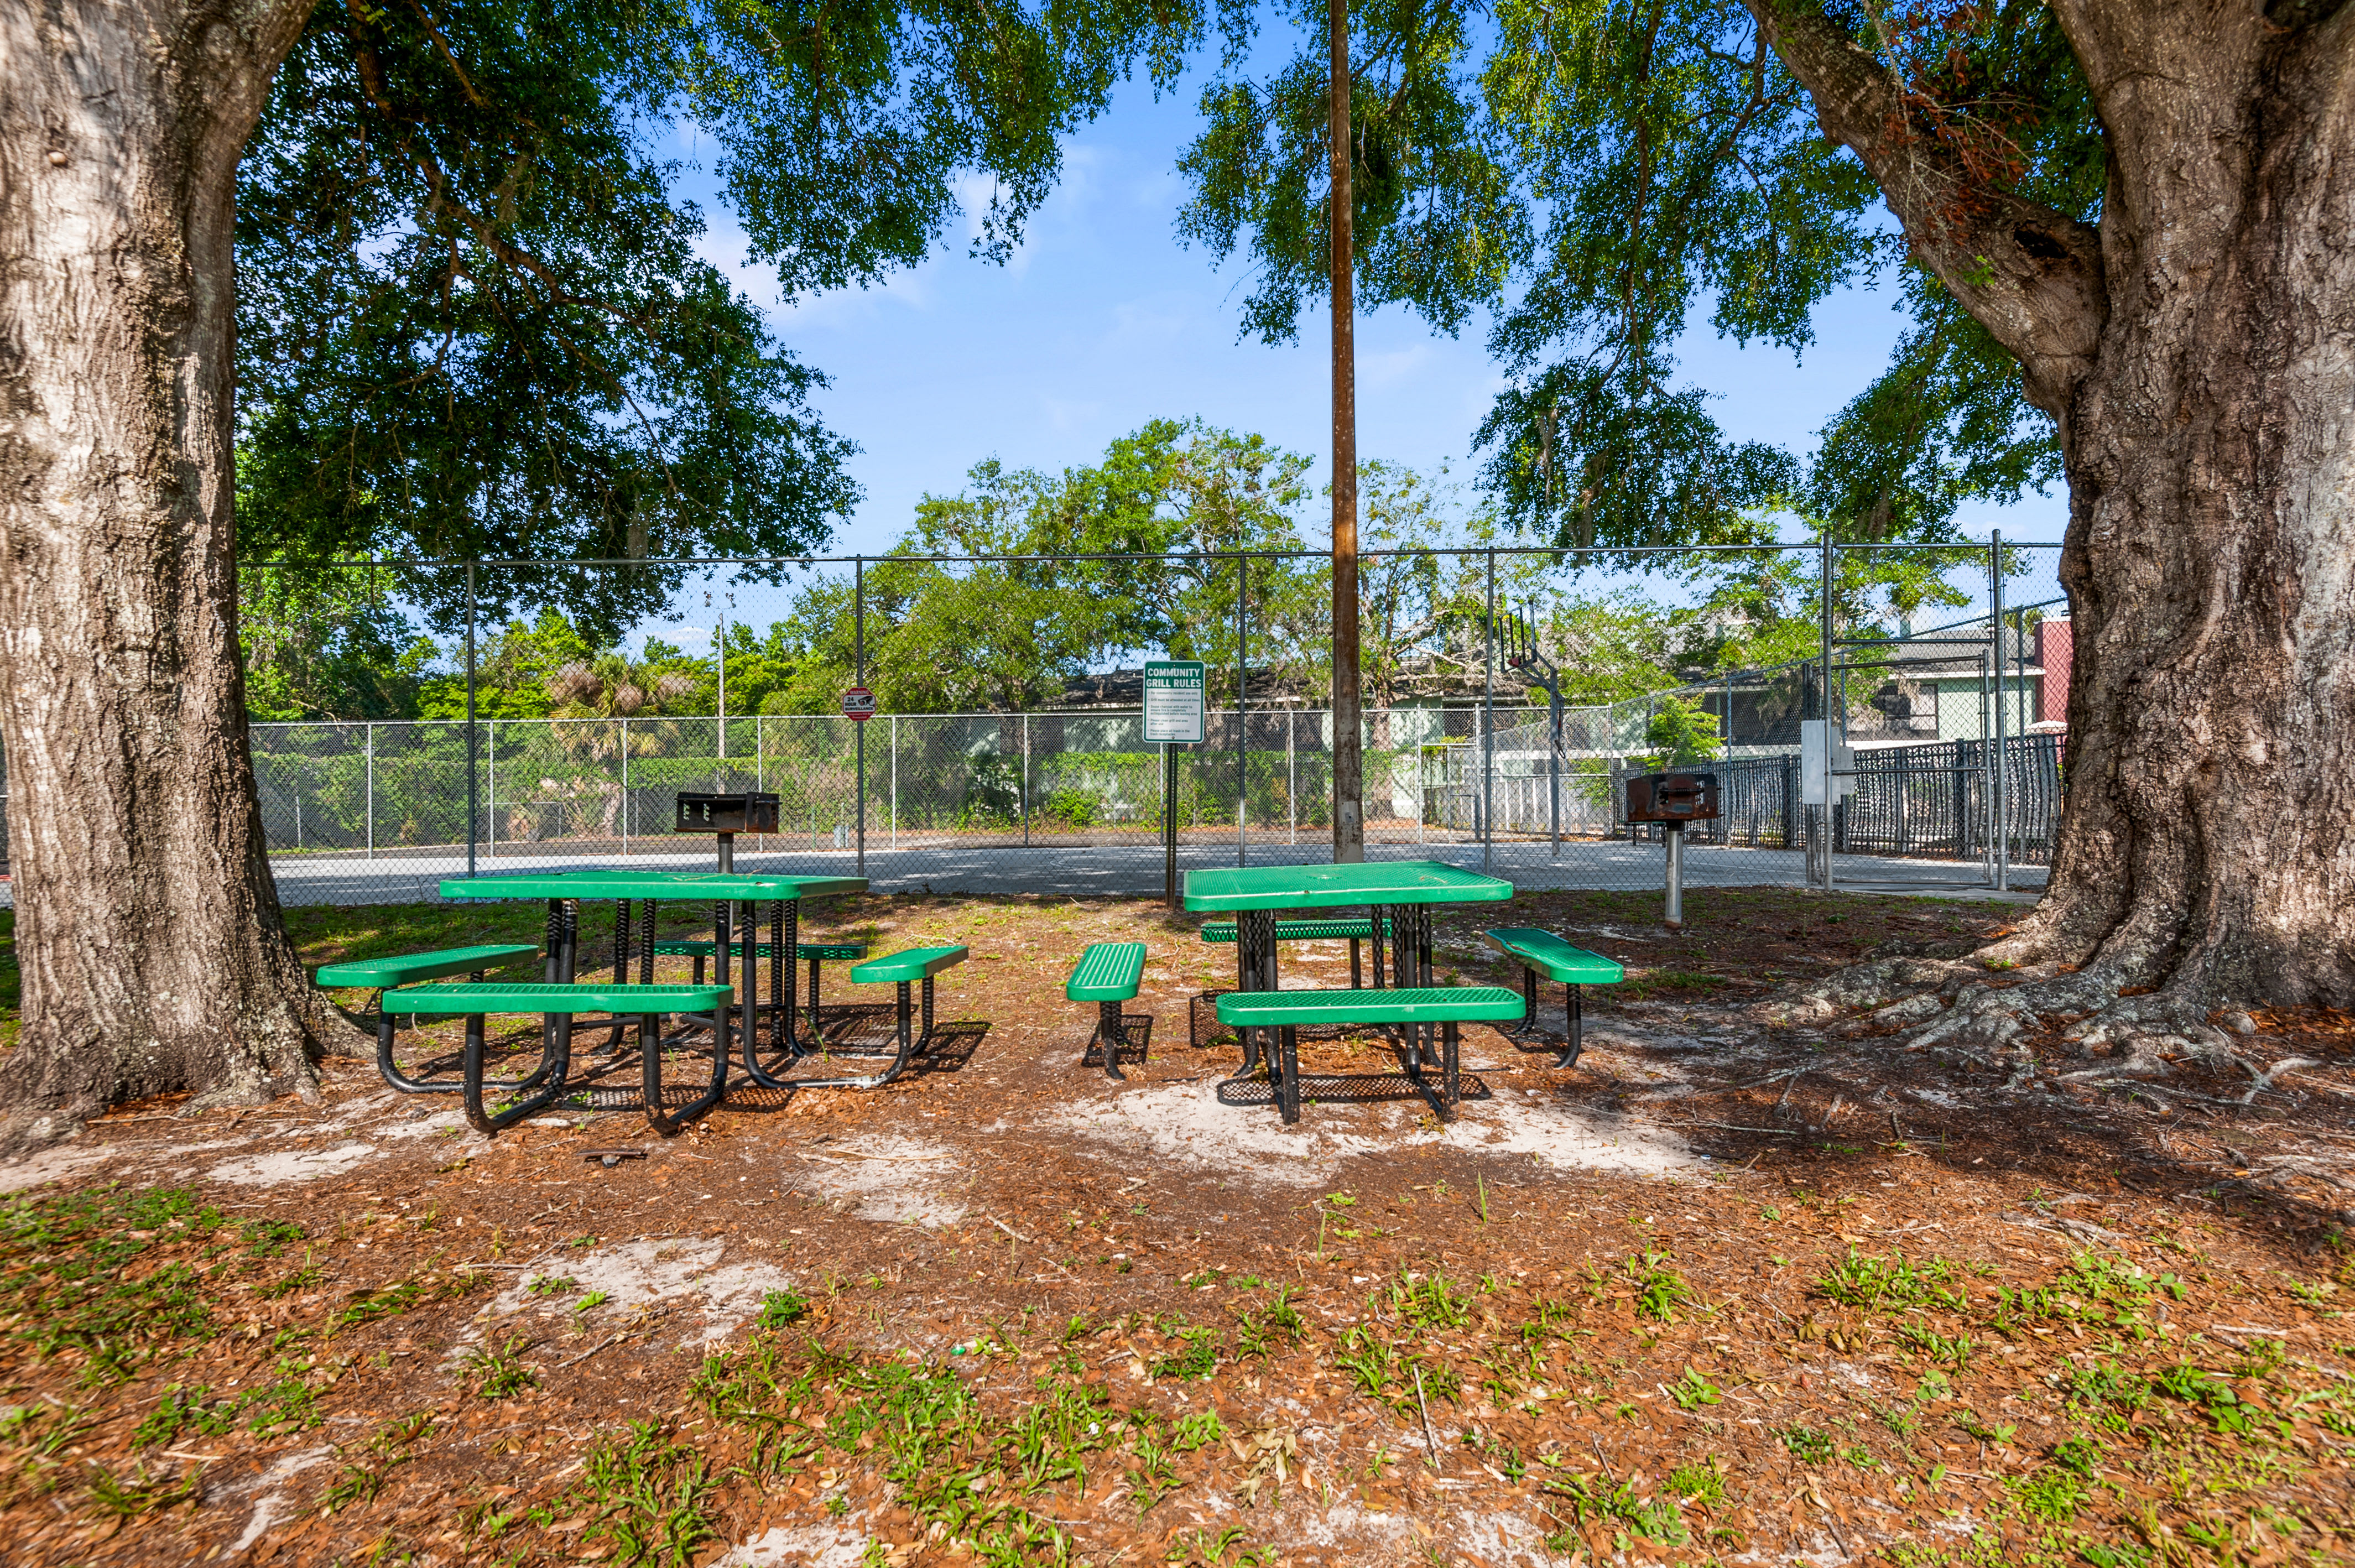 Picnic area at Stone Creek at Wekiva in Altamonte Springs, Florida